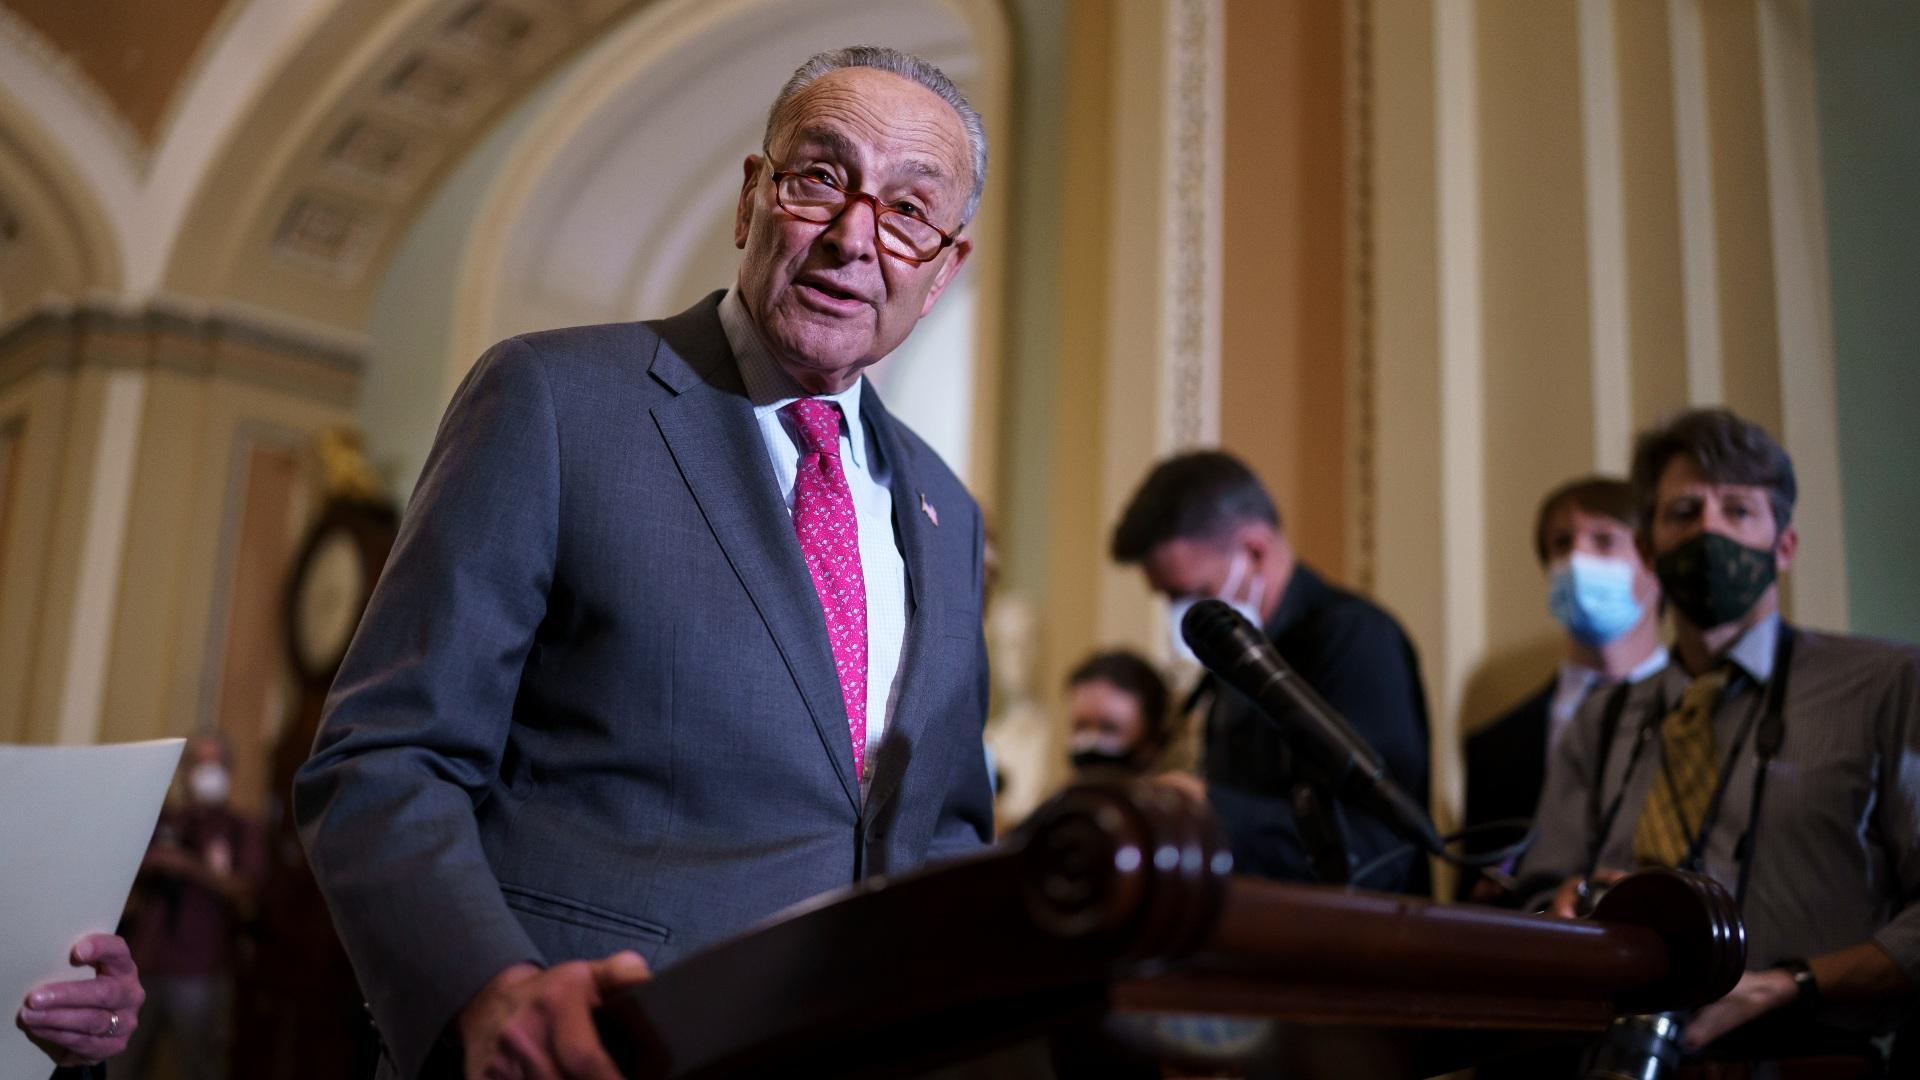 In this Aug. 3, 2021 photo, Senate Majority Leader Chuck Schumer, D-N.Y., speaks to reporters at the Capitol in Washington. (AP Photo / J. Scott Applewhite)